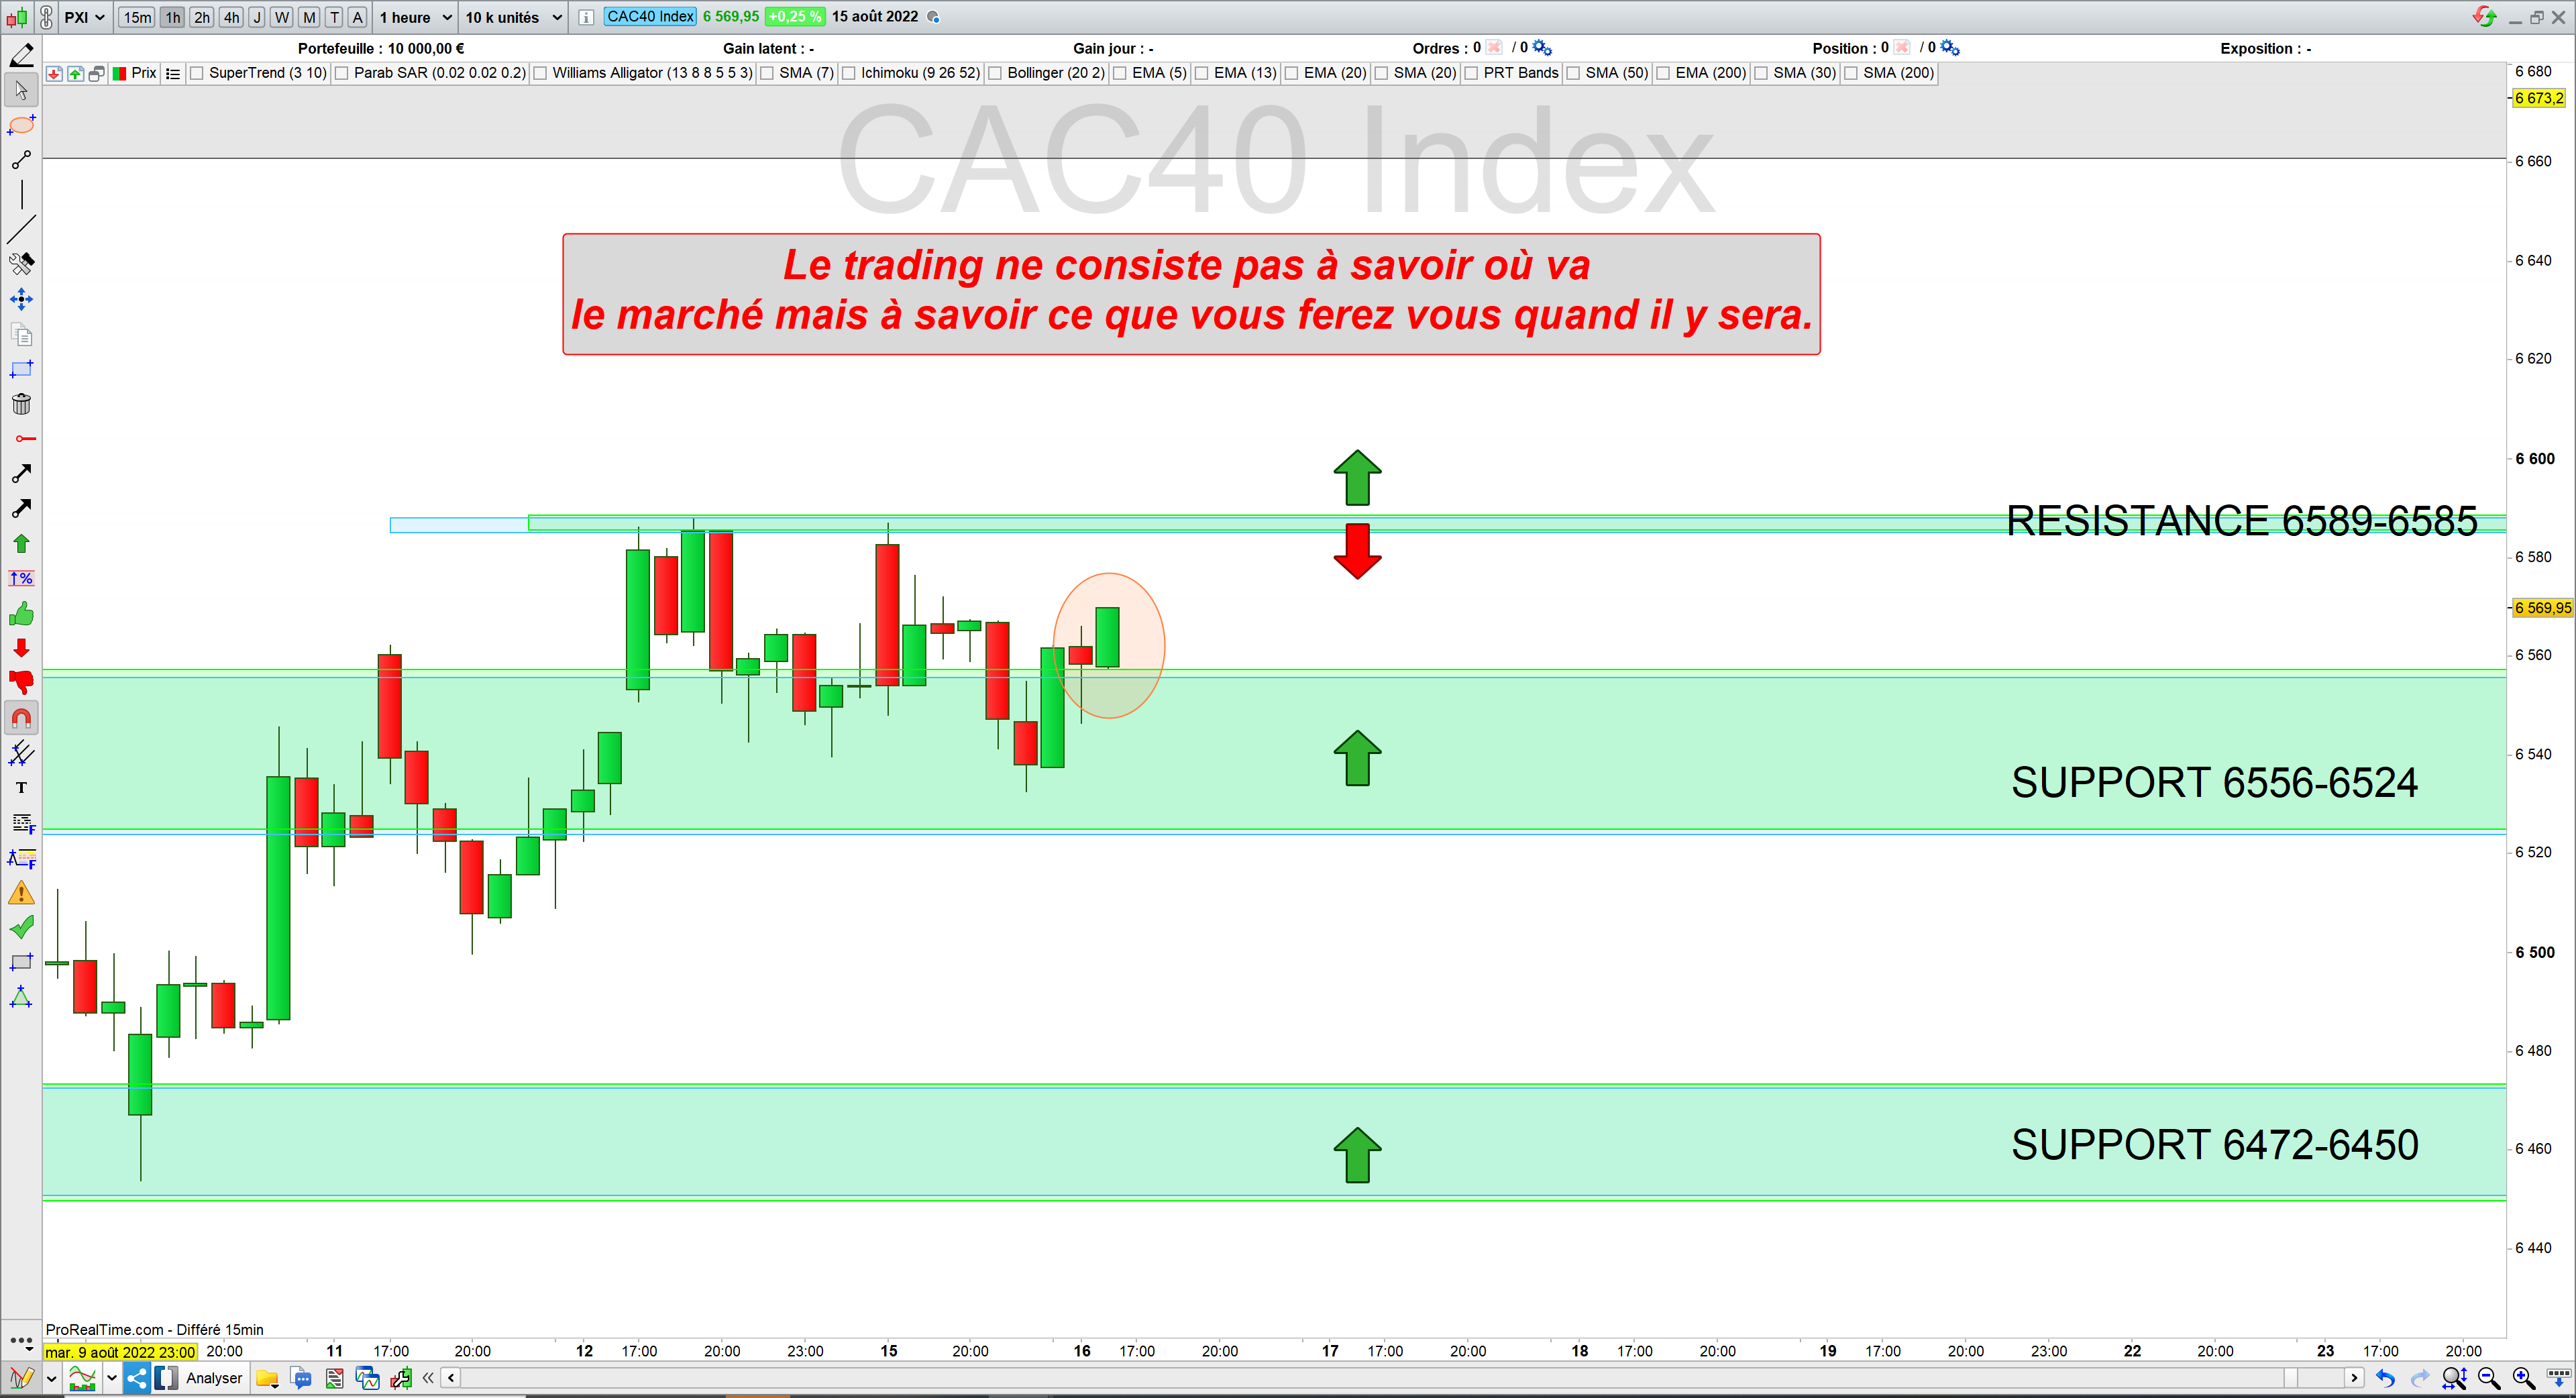 Trading cac40 16/08/22